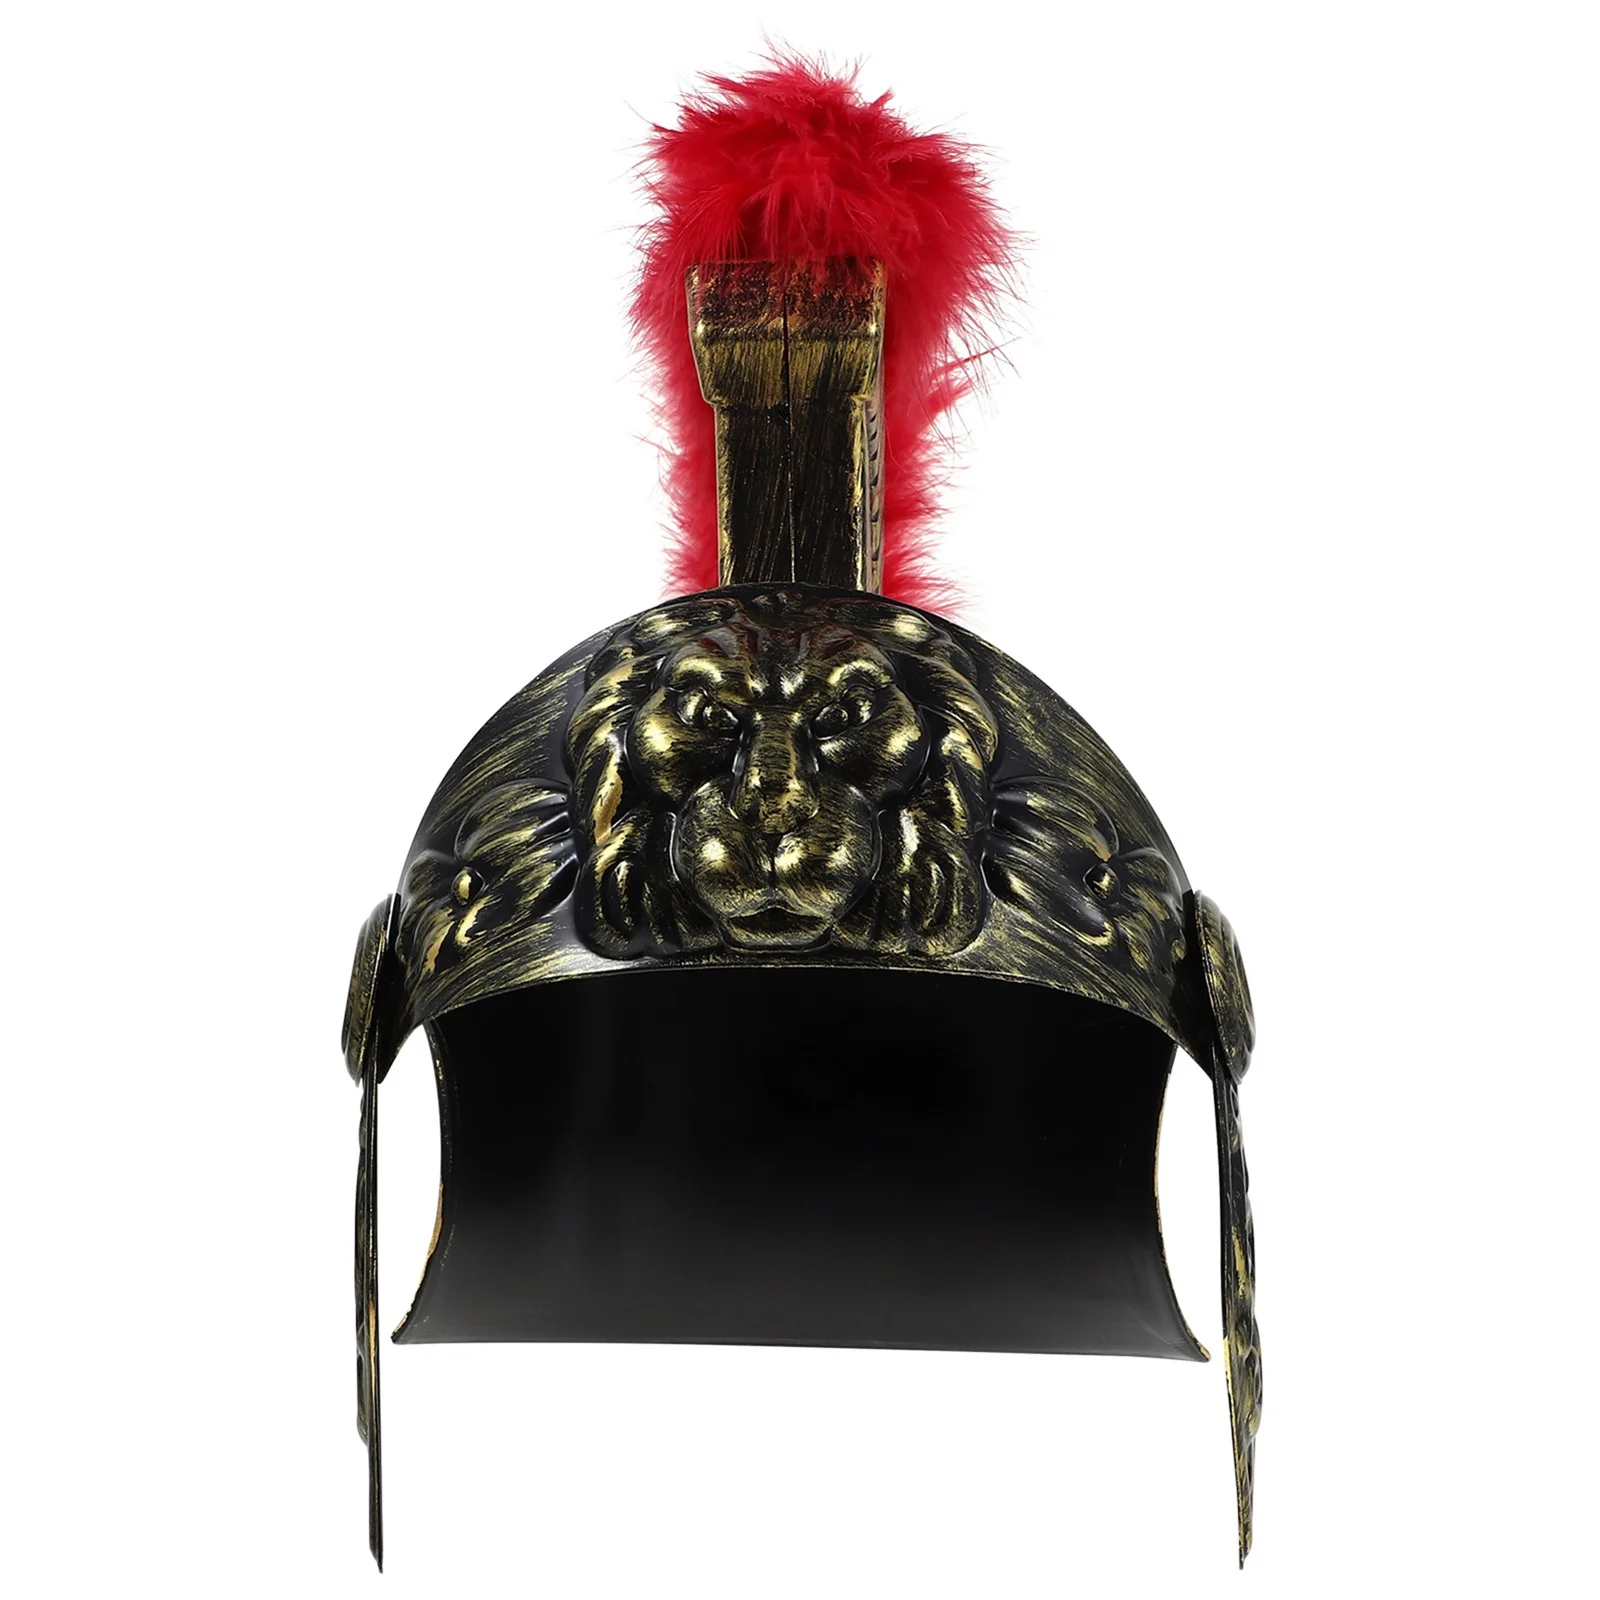 

Samurai Hat Men's Hats Roman Soldier Costume Clothing Warrior Adults Gladiator Plastic Middle Ages